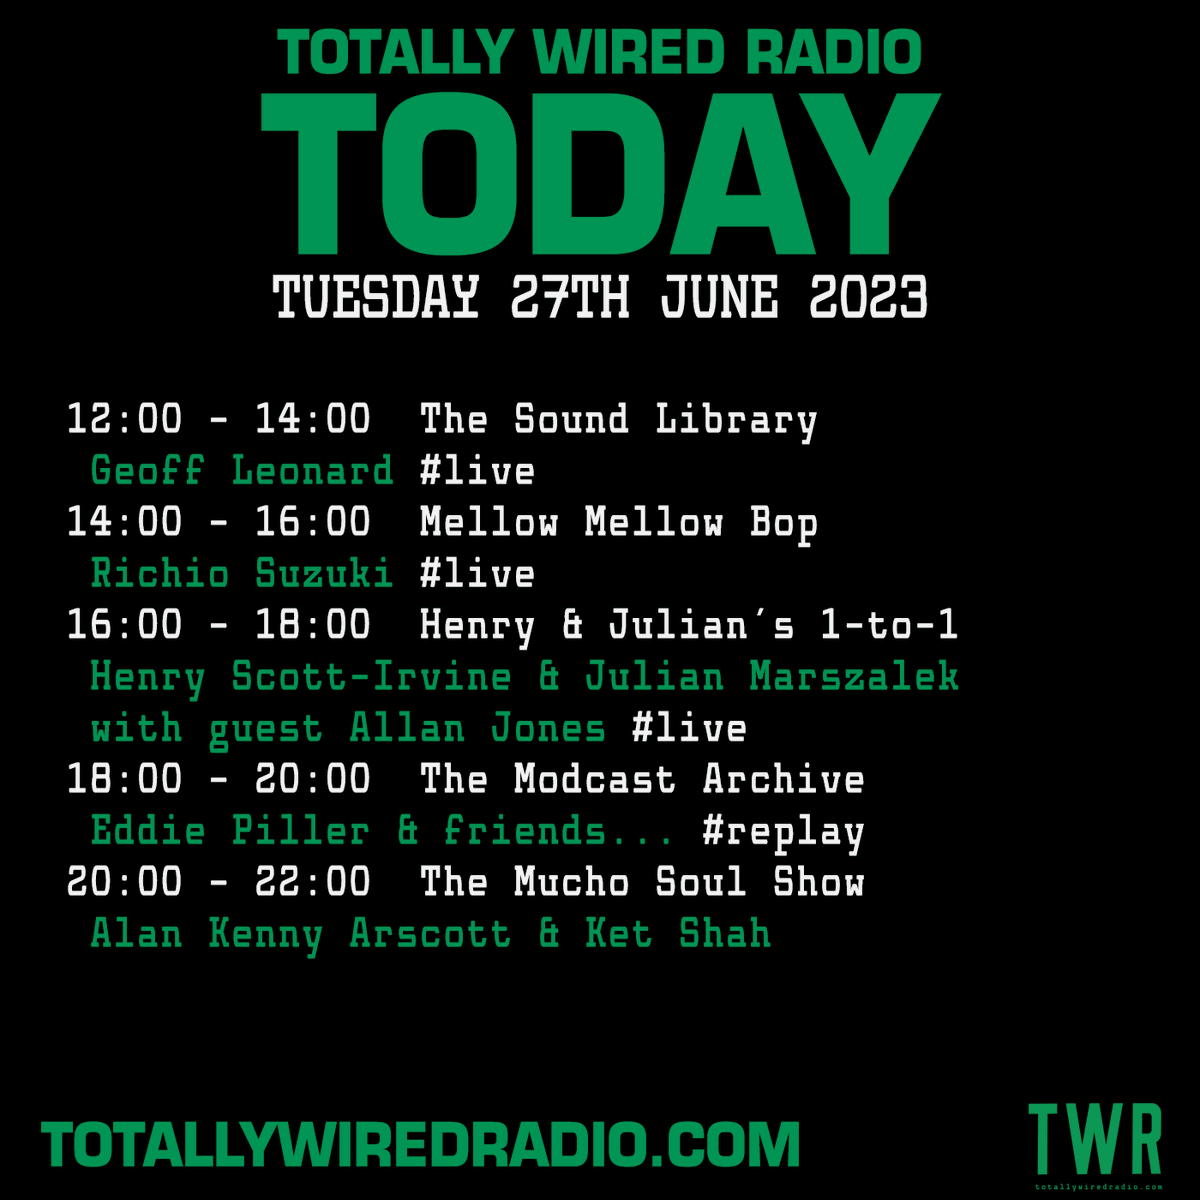 #Tuesday on #TotallyWiredRadio See our schedule for full details @ bit.ly/towira
-
#musicislife #london #soul #funk #jazz #beats #bass #house #nujazz #disco #ska #reggae #mod #punk